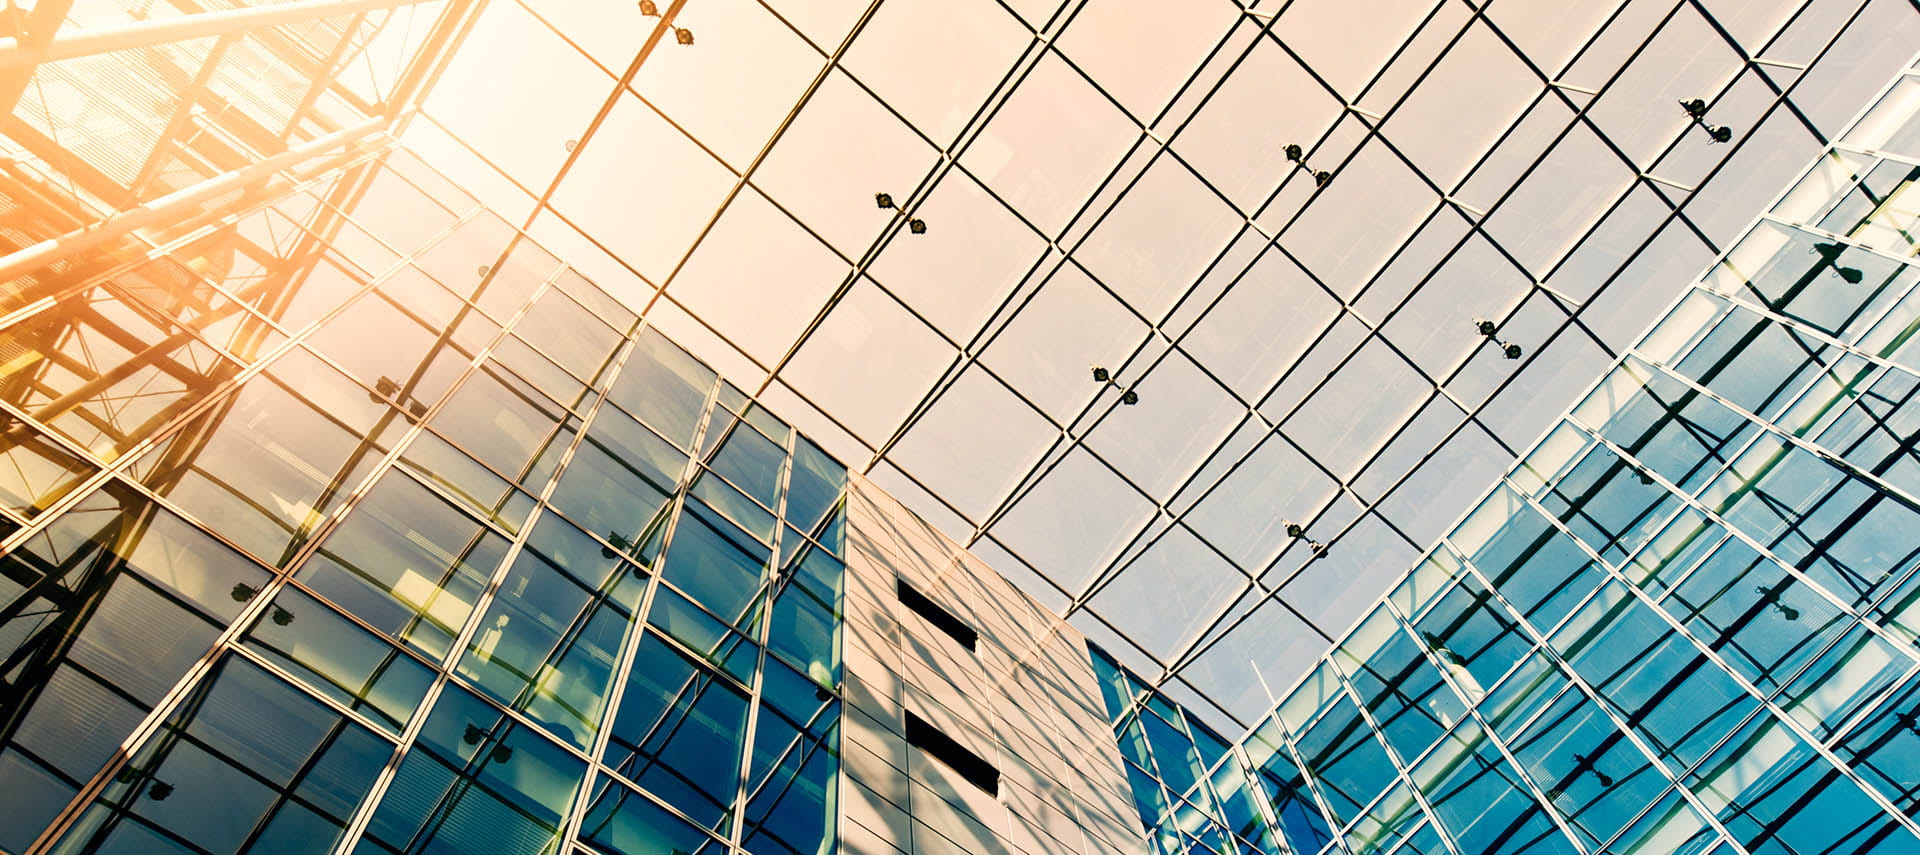 Sunny sky over steel and glass building.